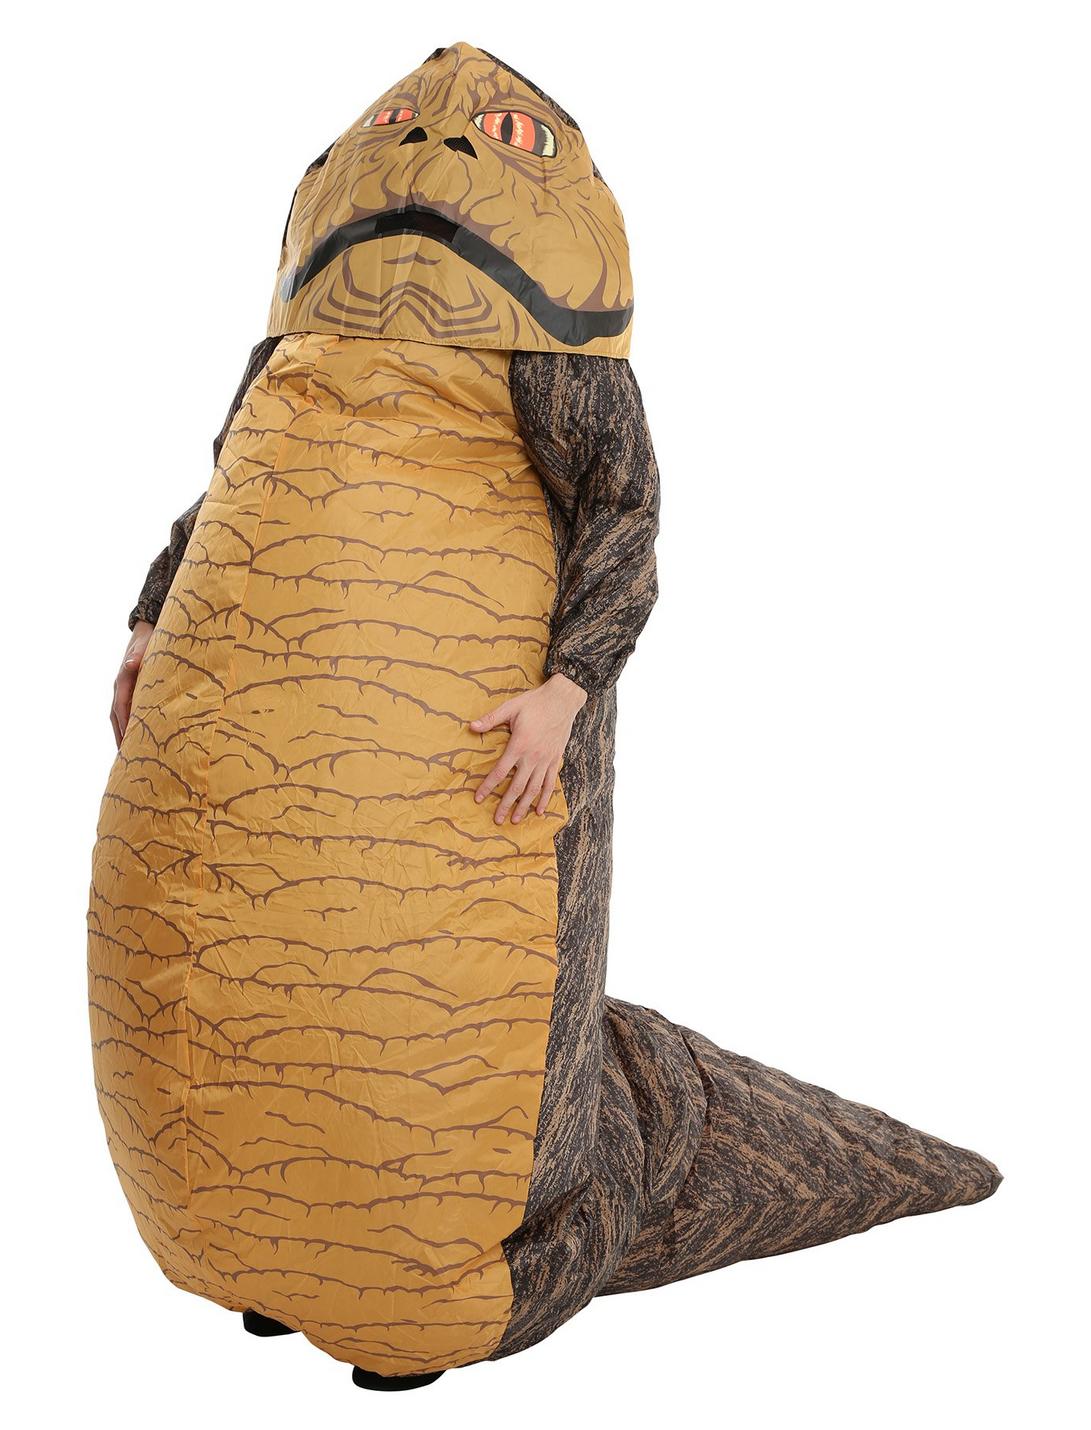 Star Wars Jabba The Hutt Inflatable Costume, , hi-res